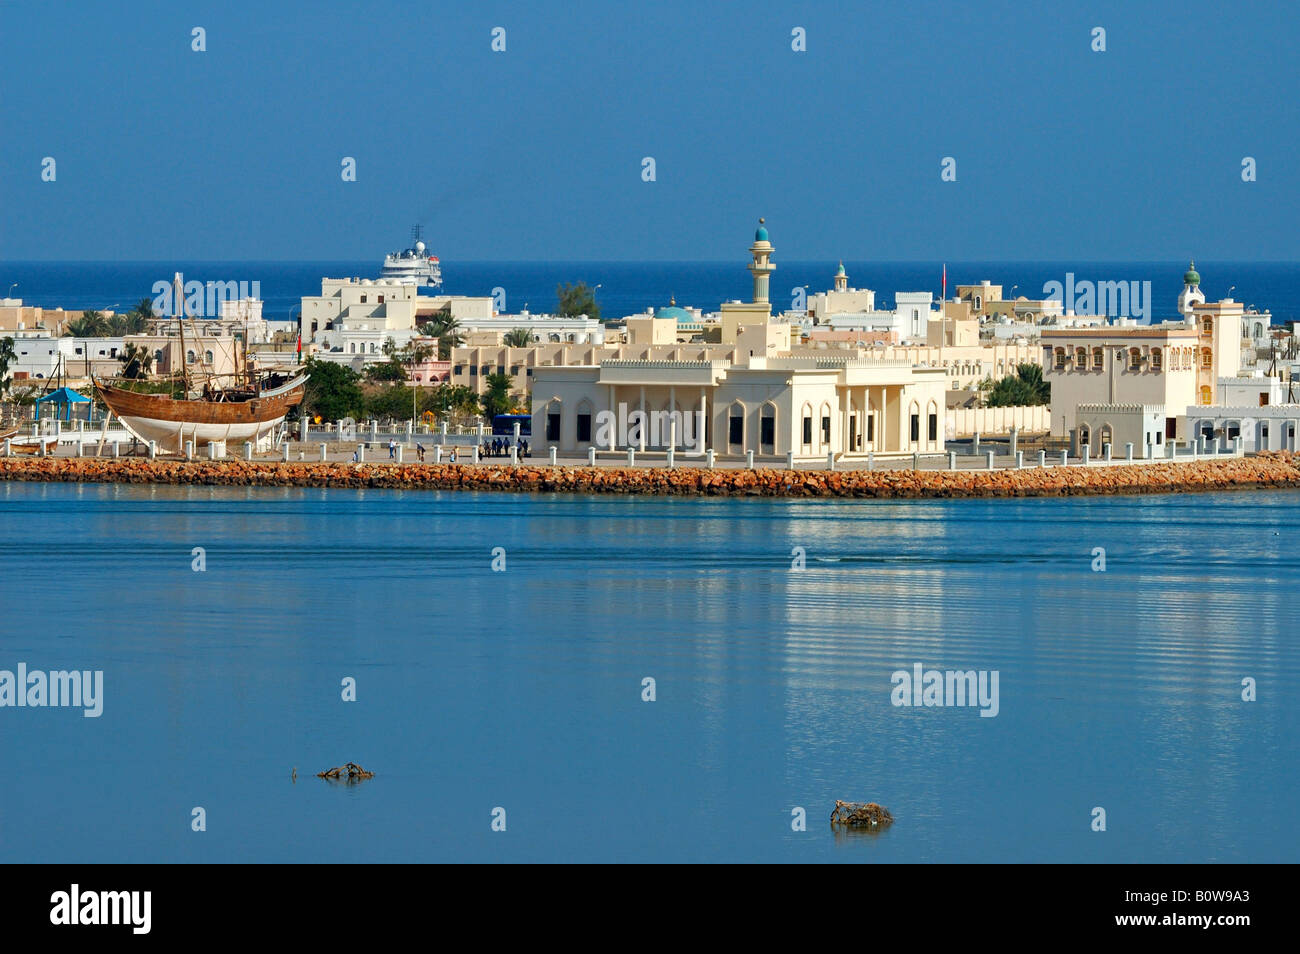 View of the Maritime Museum and the town of Sur lying between a lagoon and the Gulf of Oman, Oman, Middle East Stock Photo